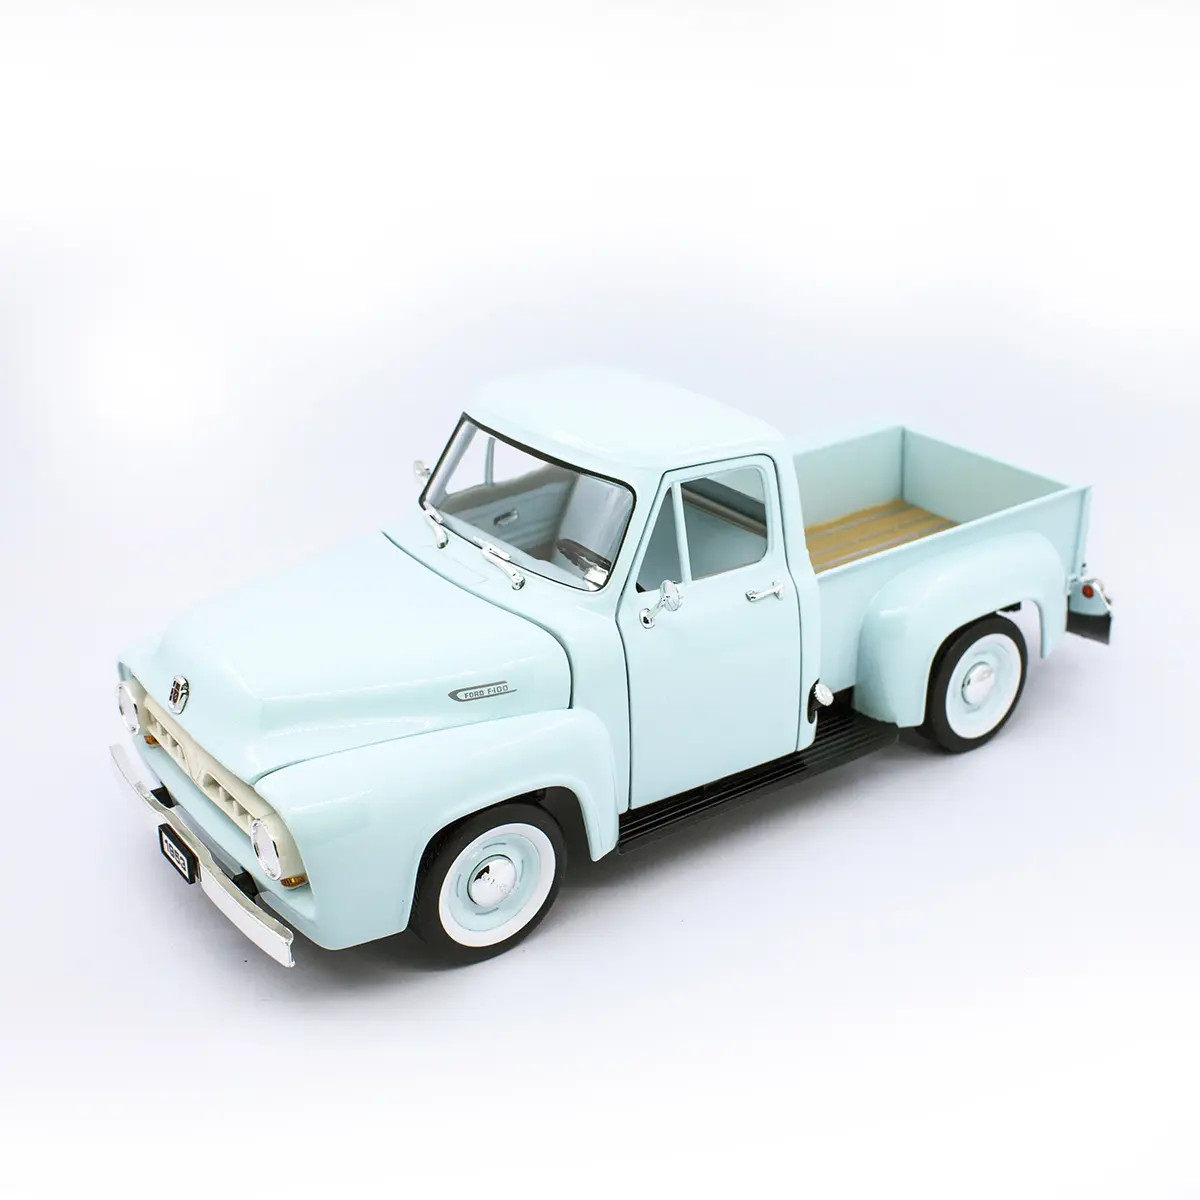 1953 FORD F100 PICK UP TRUCK IN 1:18 SCALE (LIGHT GREEN